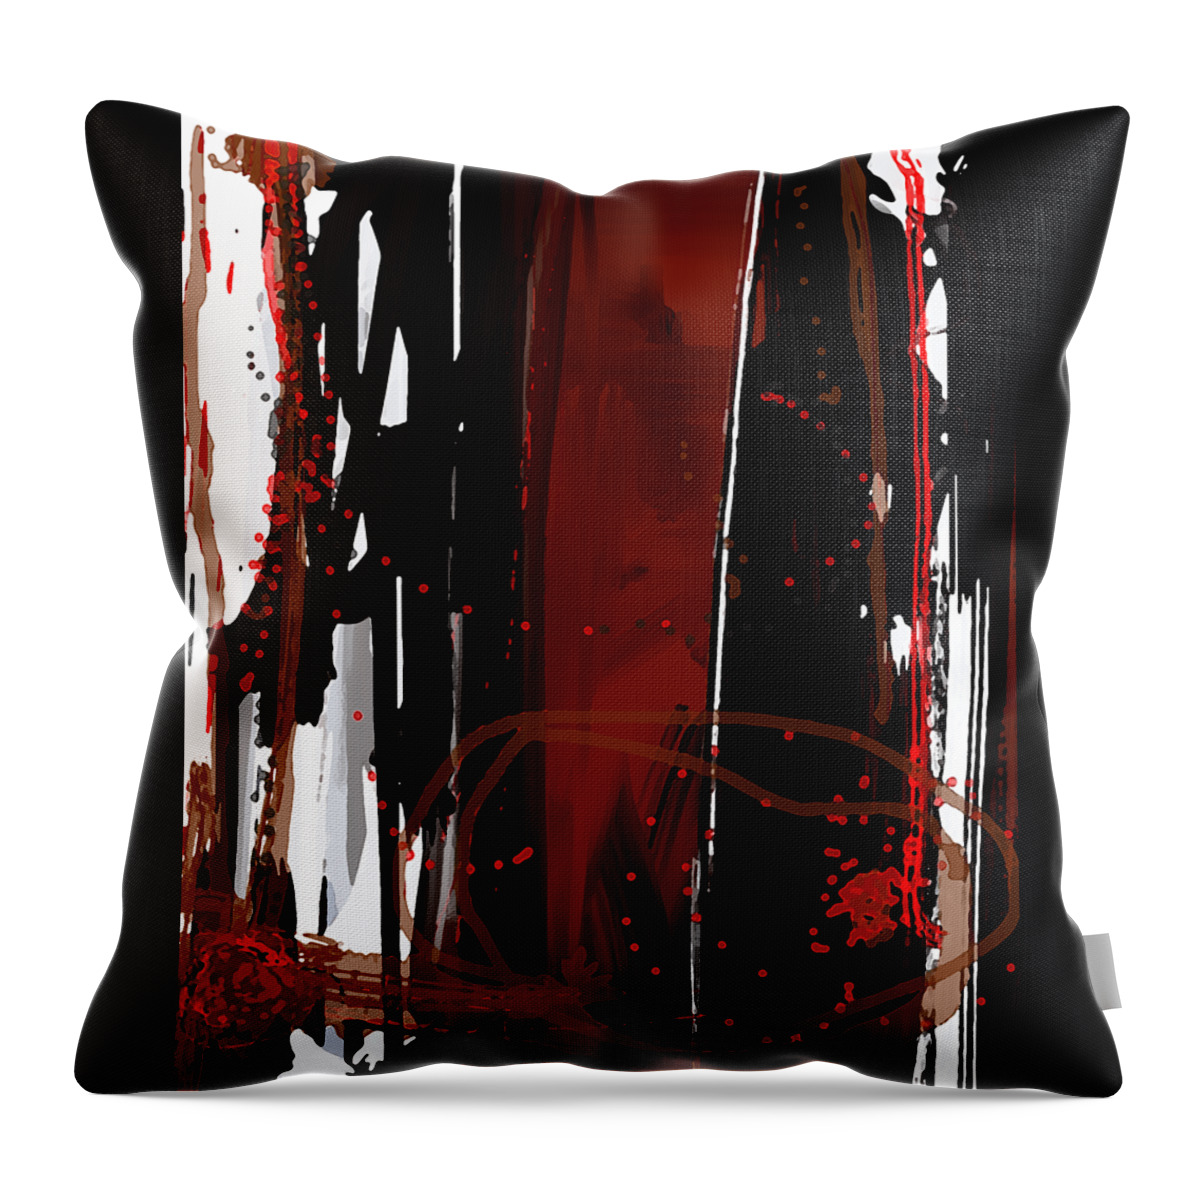 Abstract Painting Digital Art Image Vertical Lines Throw Pillow featuring the digital art Parallels - Modern Abstract Digital Art by Patricia Awapara